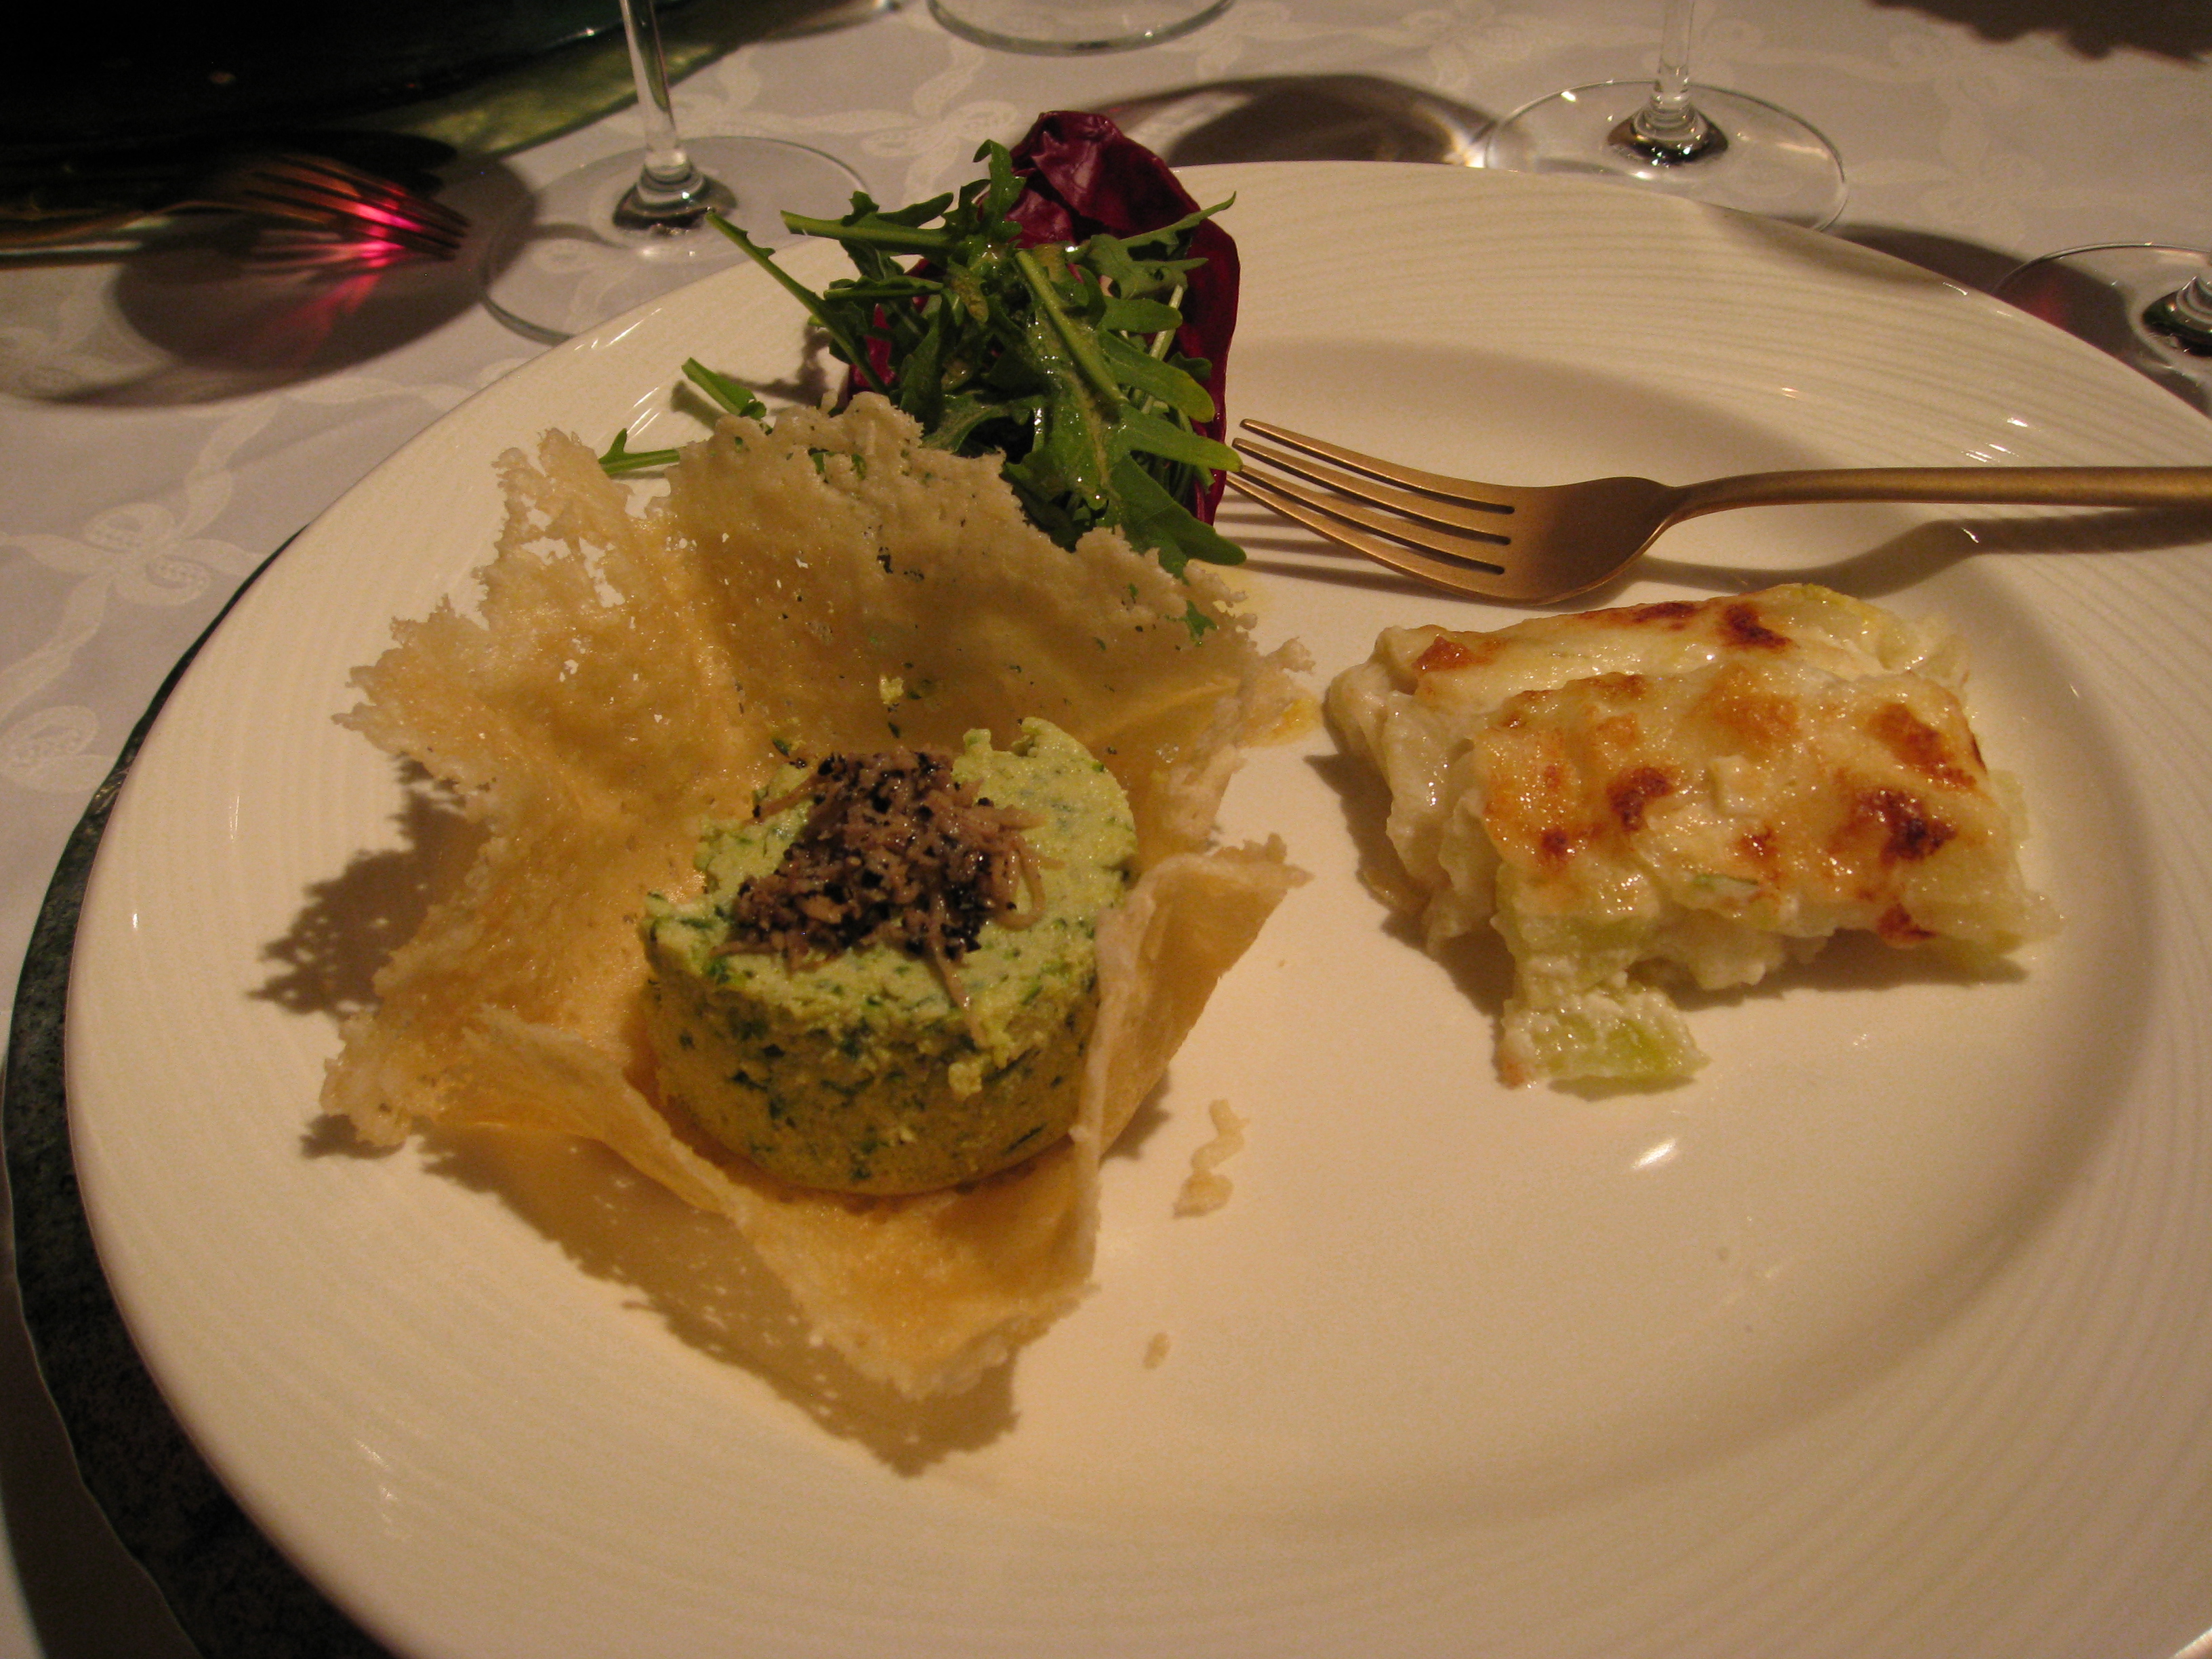 Perfectly crafted Parmesan shell with zucchini flan